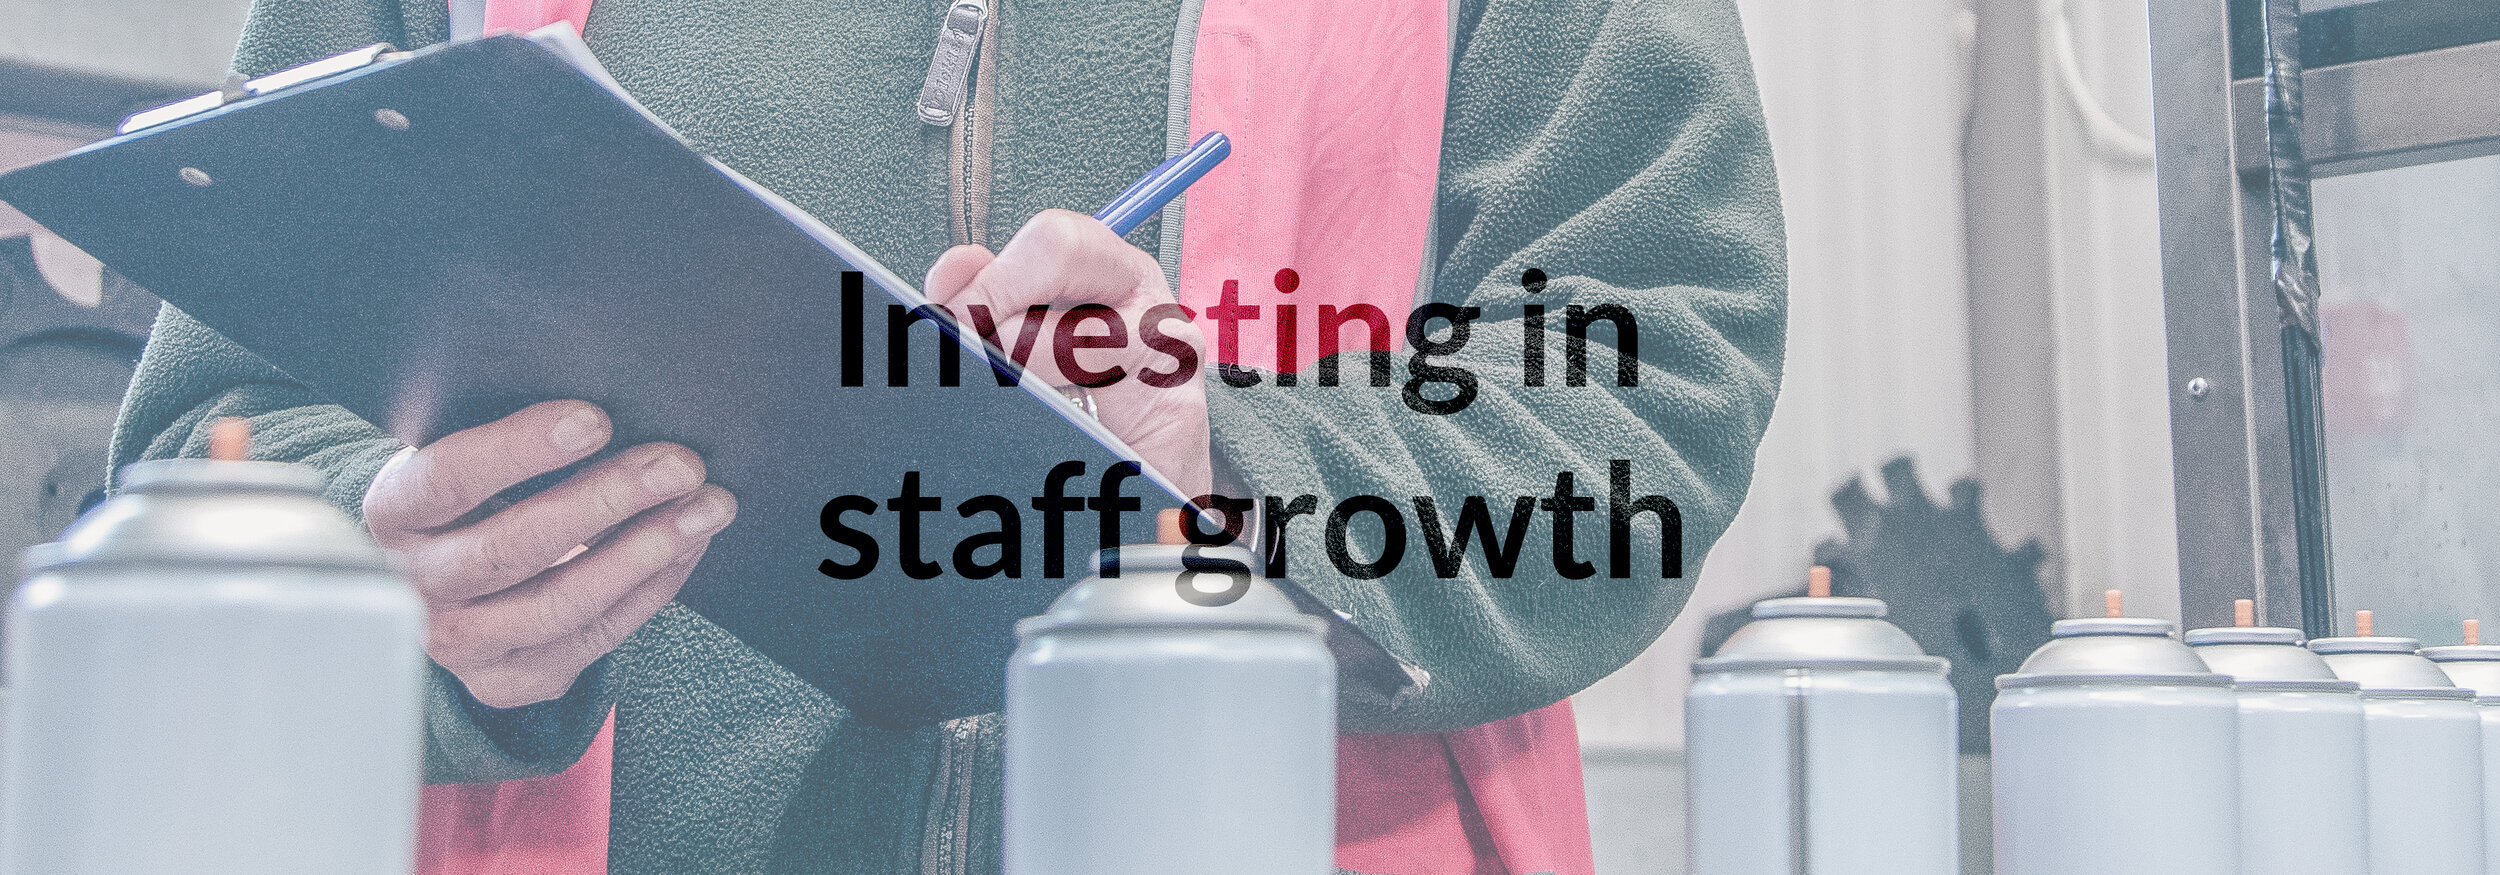 investing in staff growth.jpg